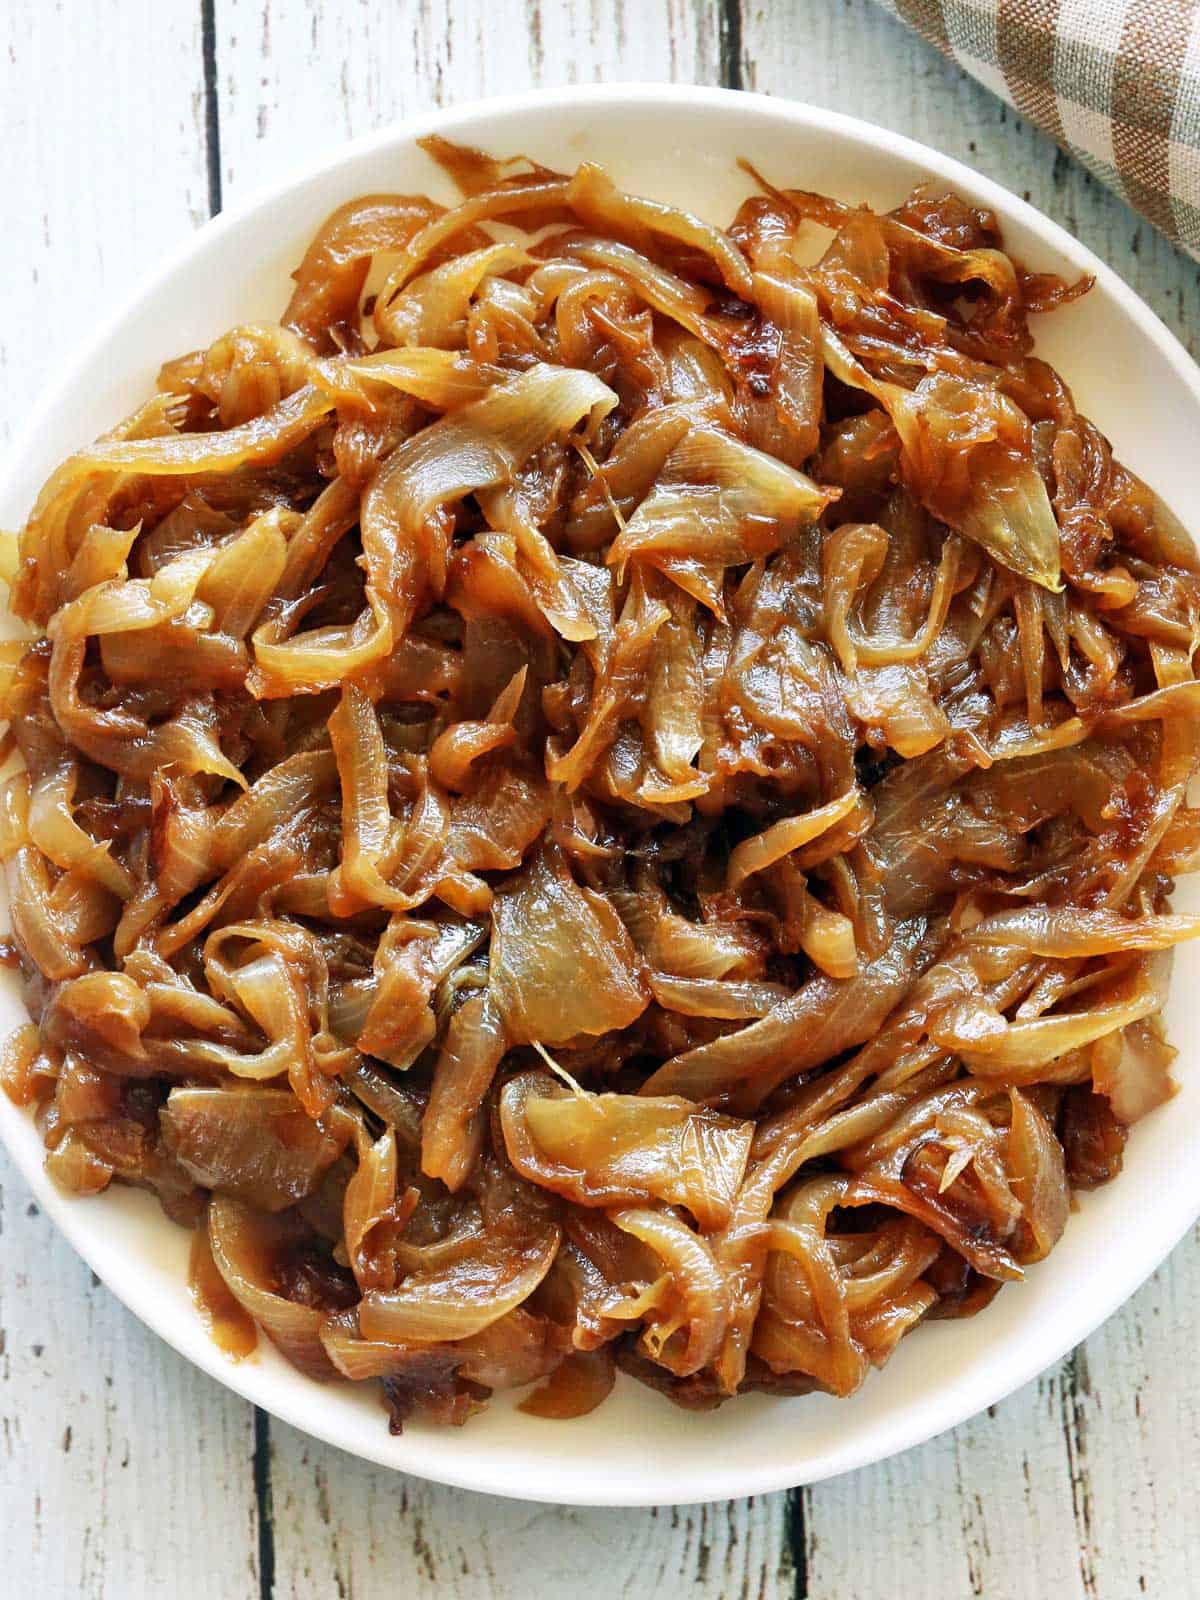 Caramelized onions served on a white plate with a napkin.